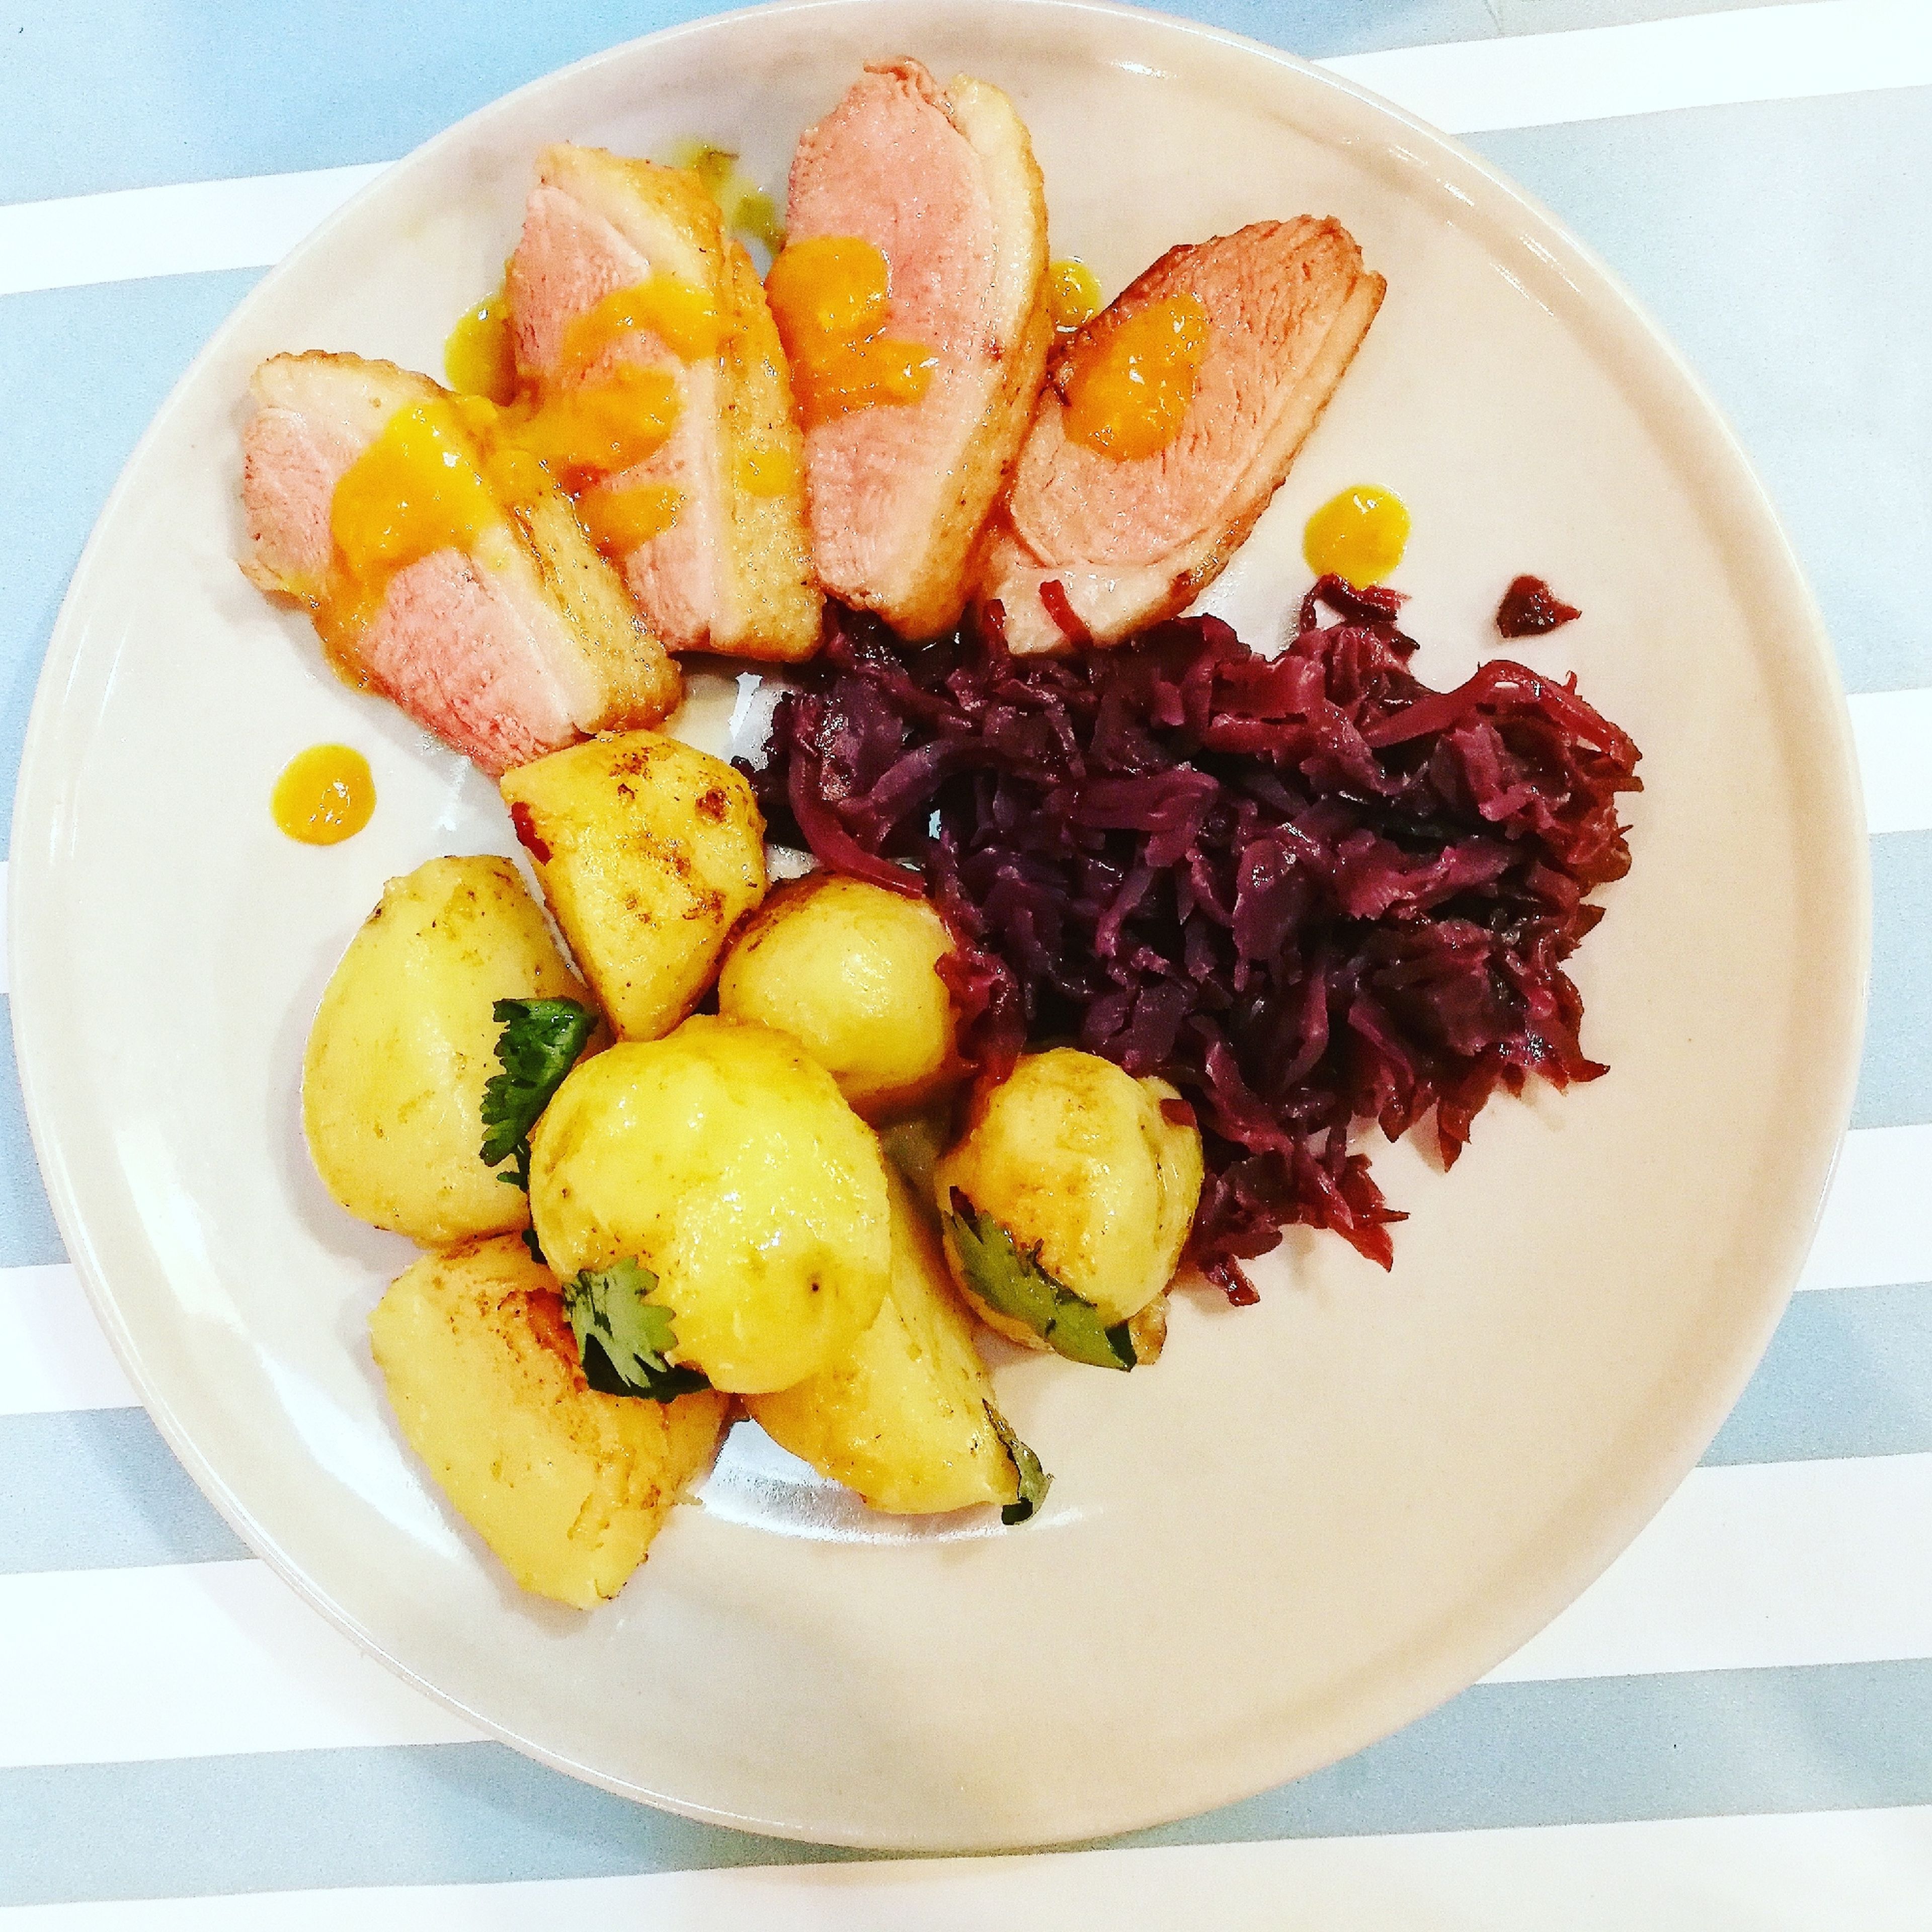 Roast duck with red cabbage and new potatoes